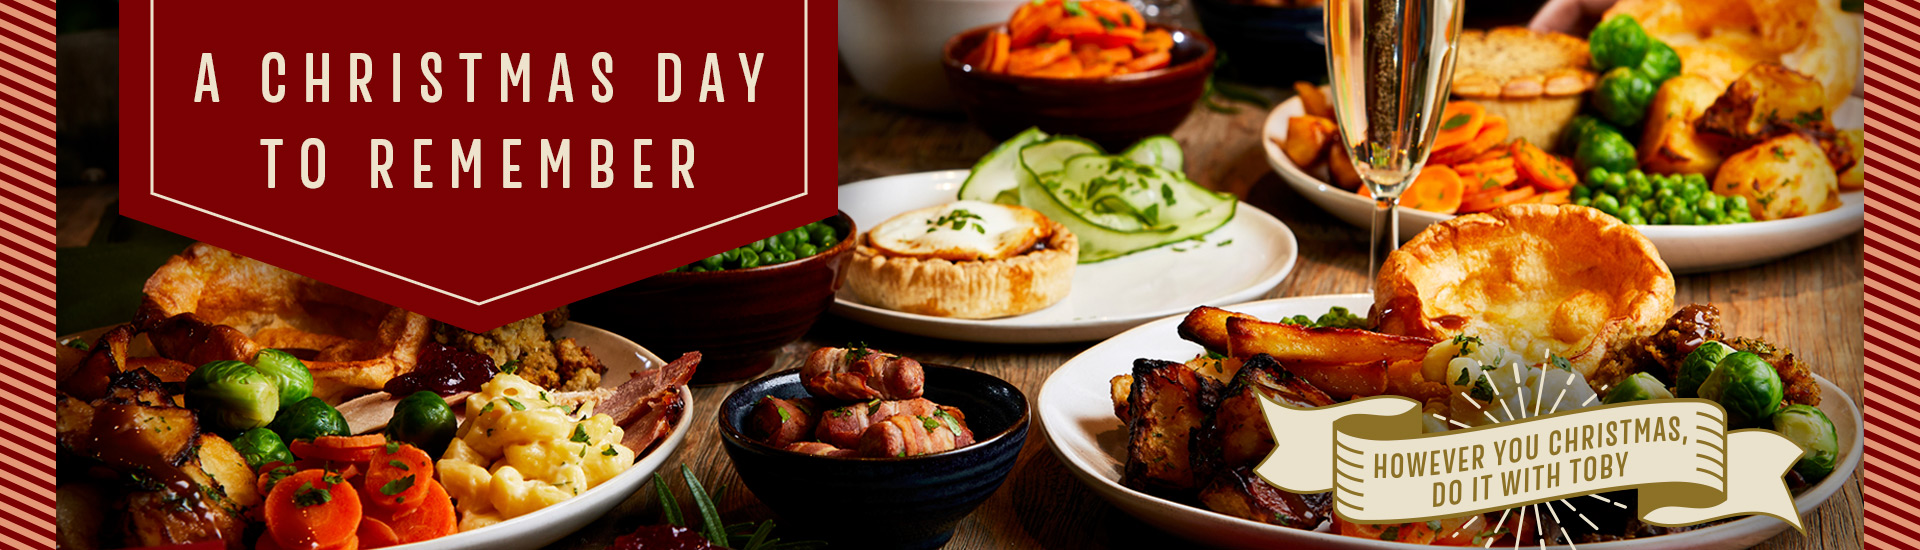 Christmas Day menu at Toby Carvery Harlow